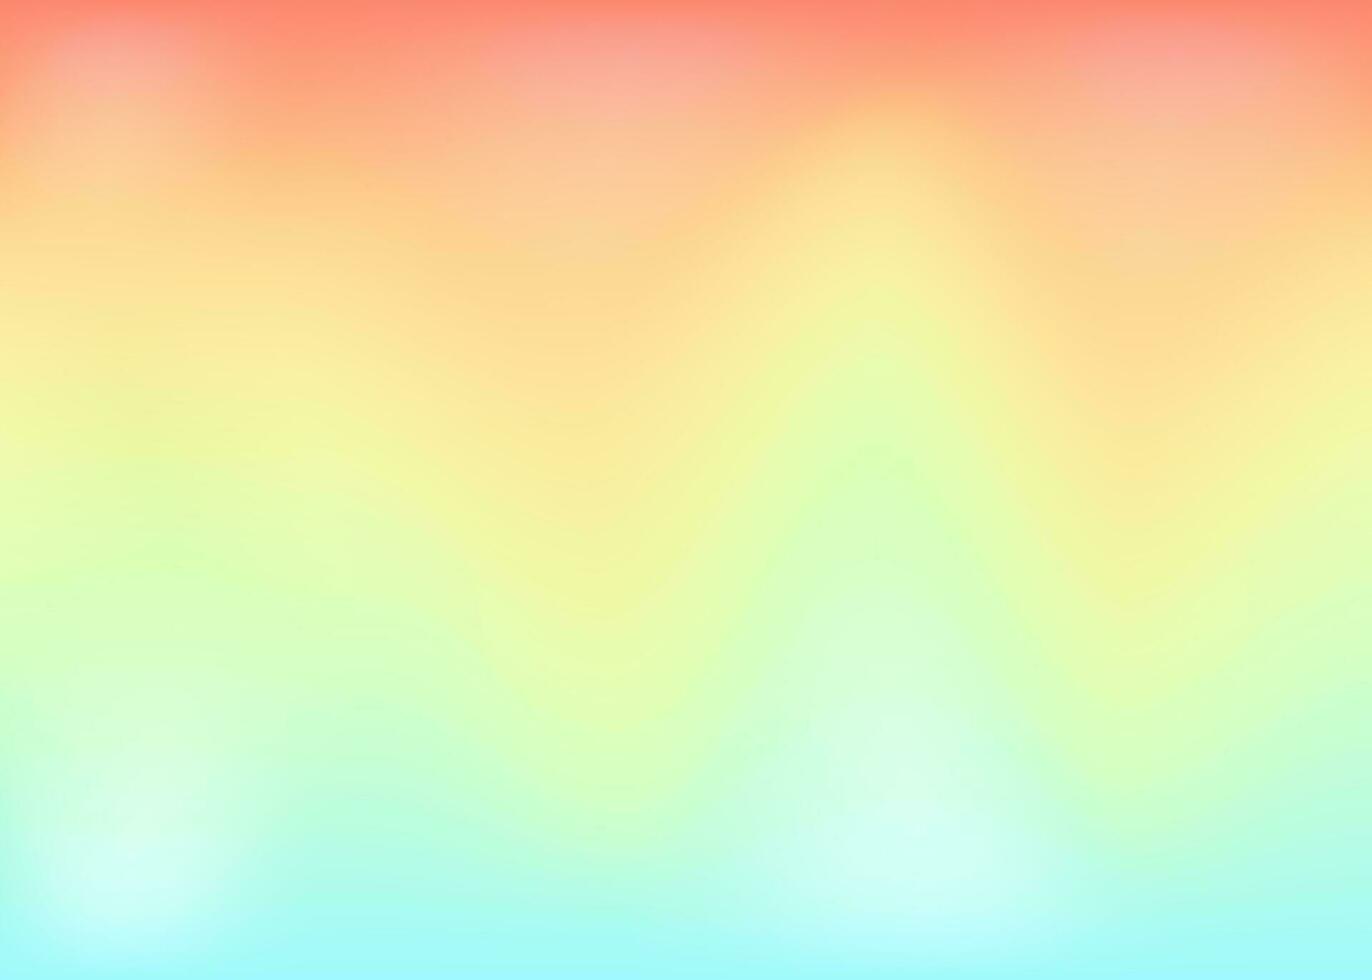 Gradient mesh abstract background. Multicolor holographic backdrop with gradient mesh. 90s, 80s retro style. Pearlescent graphic template for banner, flyer, cover design, mobile interface, web app. vector